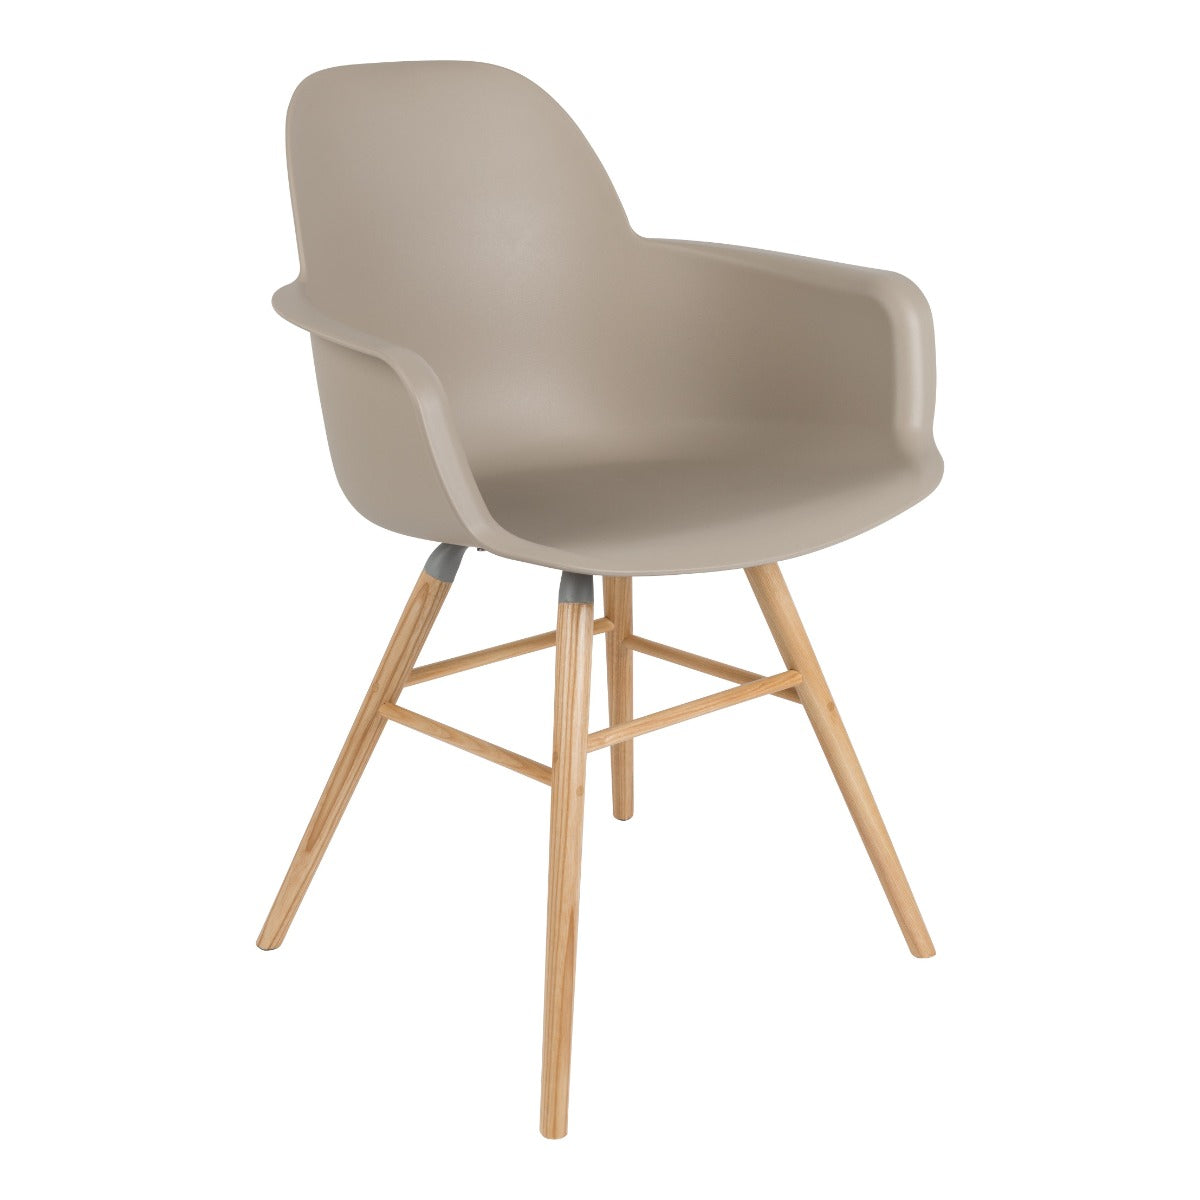 The Alebert Kuip armchair is a combination that will work great both in a modern office as well as in the Scandinavian dining room. The comfort of use is provided by armrests that make you not want to get up. The seat is made of the highest quality plastic in a distinct color. The legs are made of ash wood, which was covered with varnish, which makes them perfectly combined with the aluminum frame, creating extraordinary consistency together.